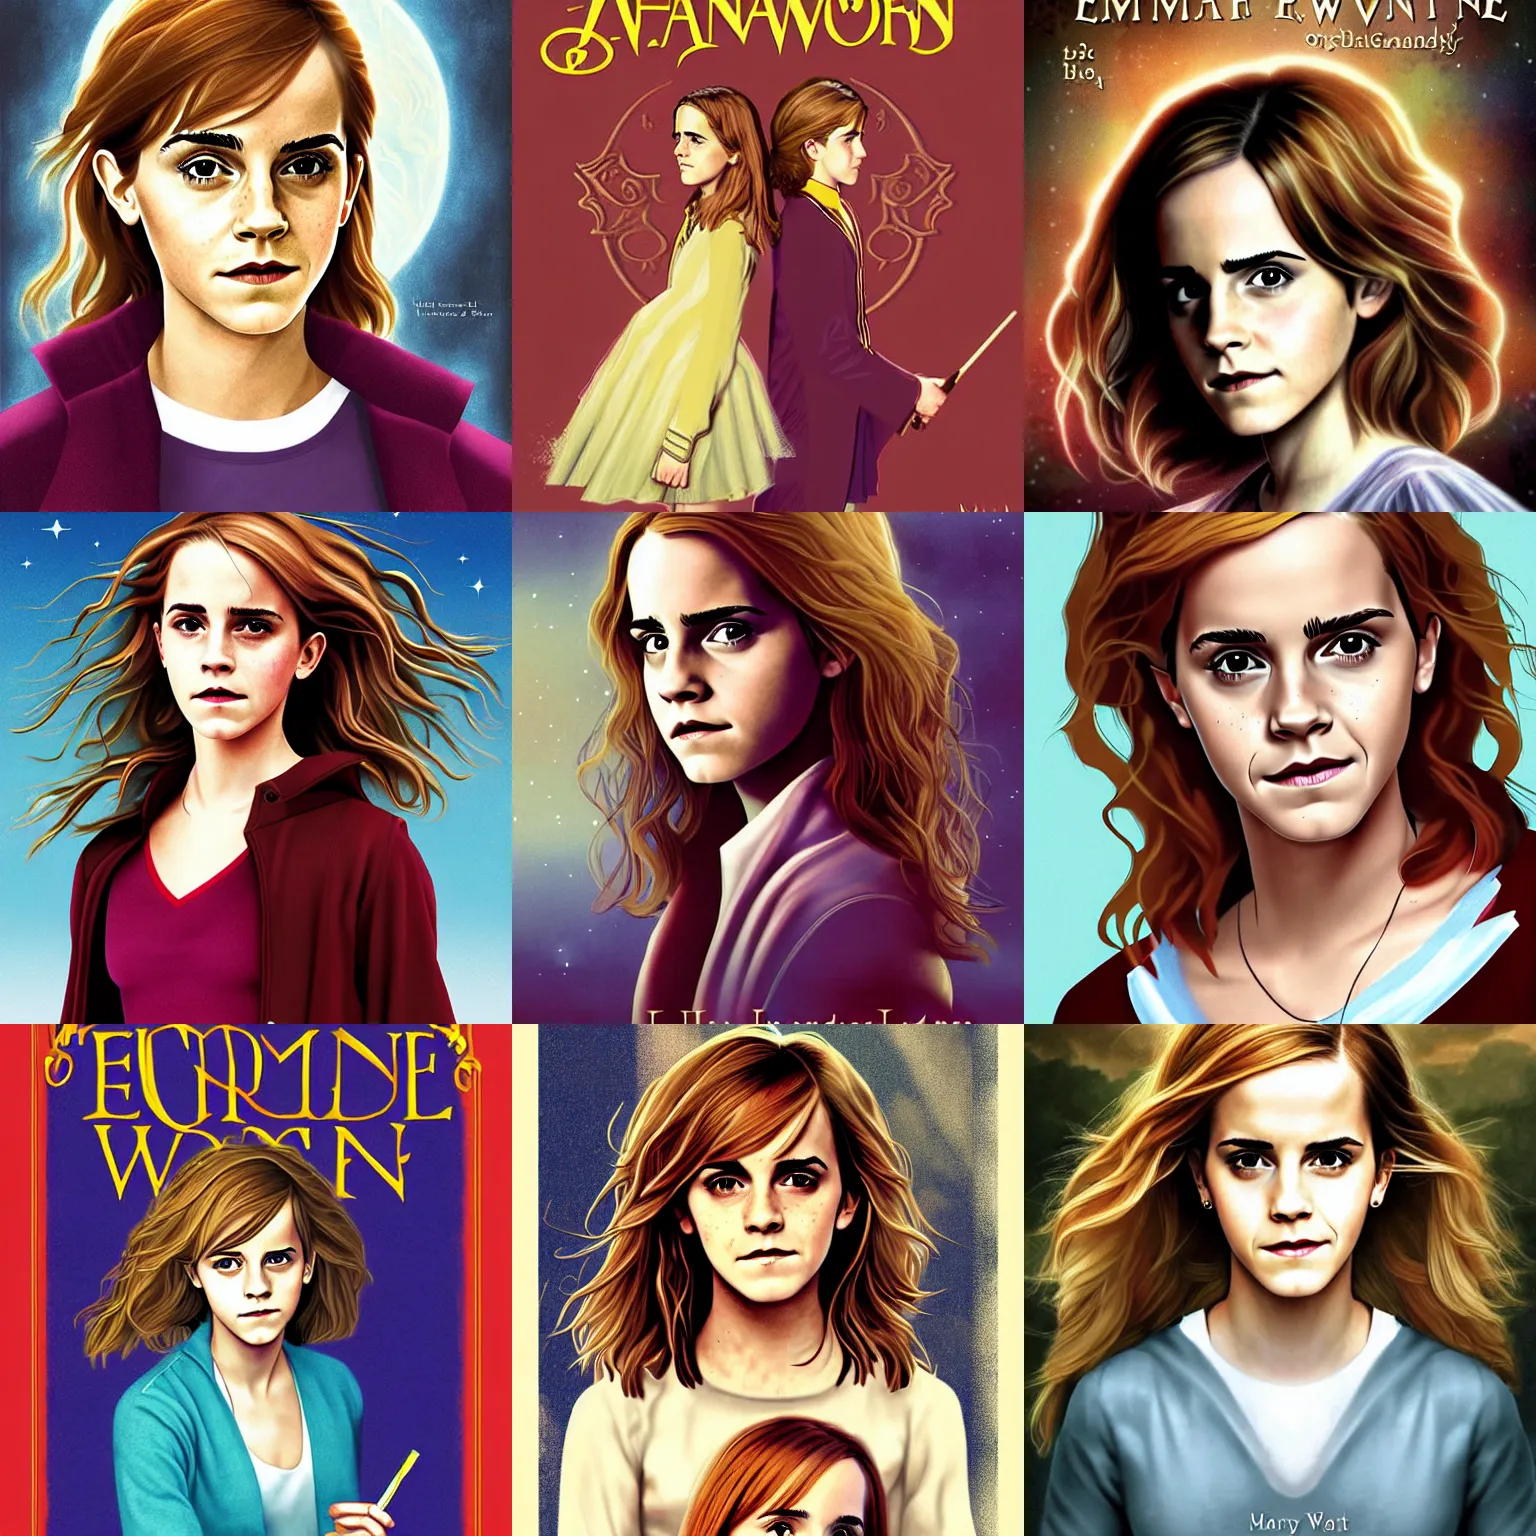 Prompt: emma watson / hermione granger, cover art by mary grandpre for a book by jk rowling